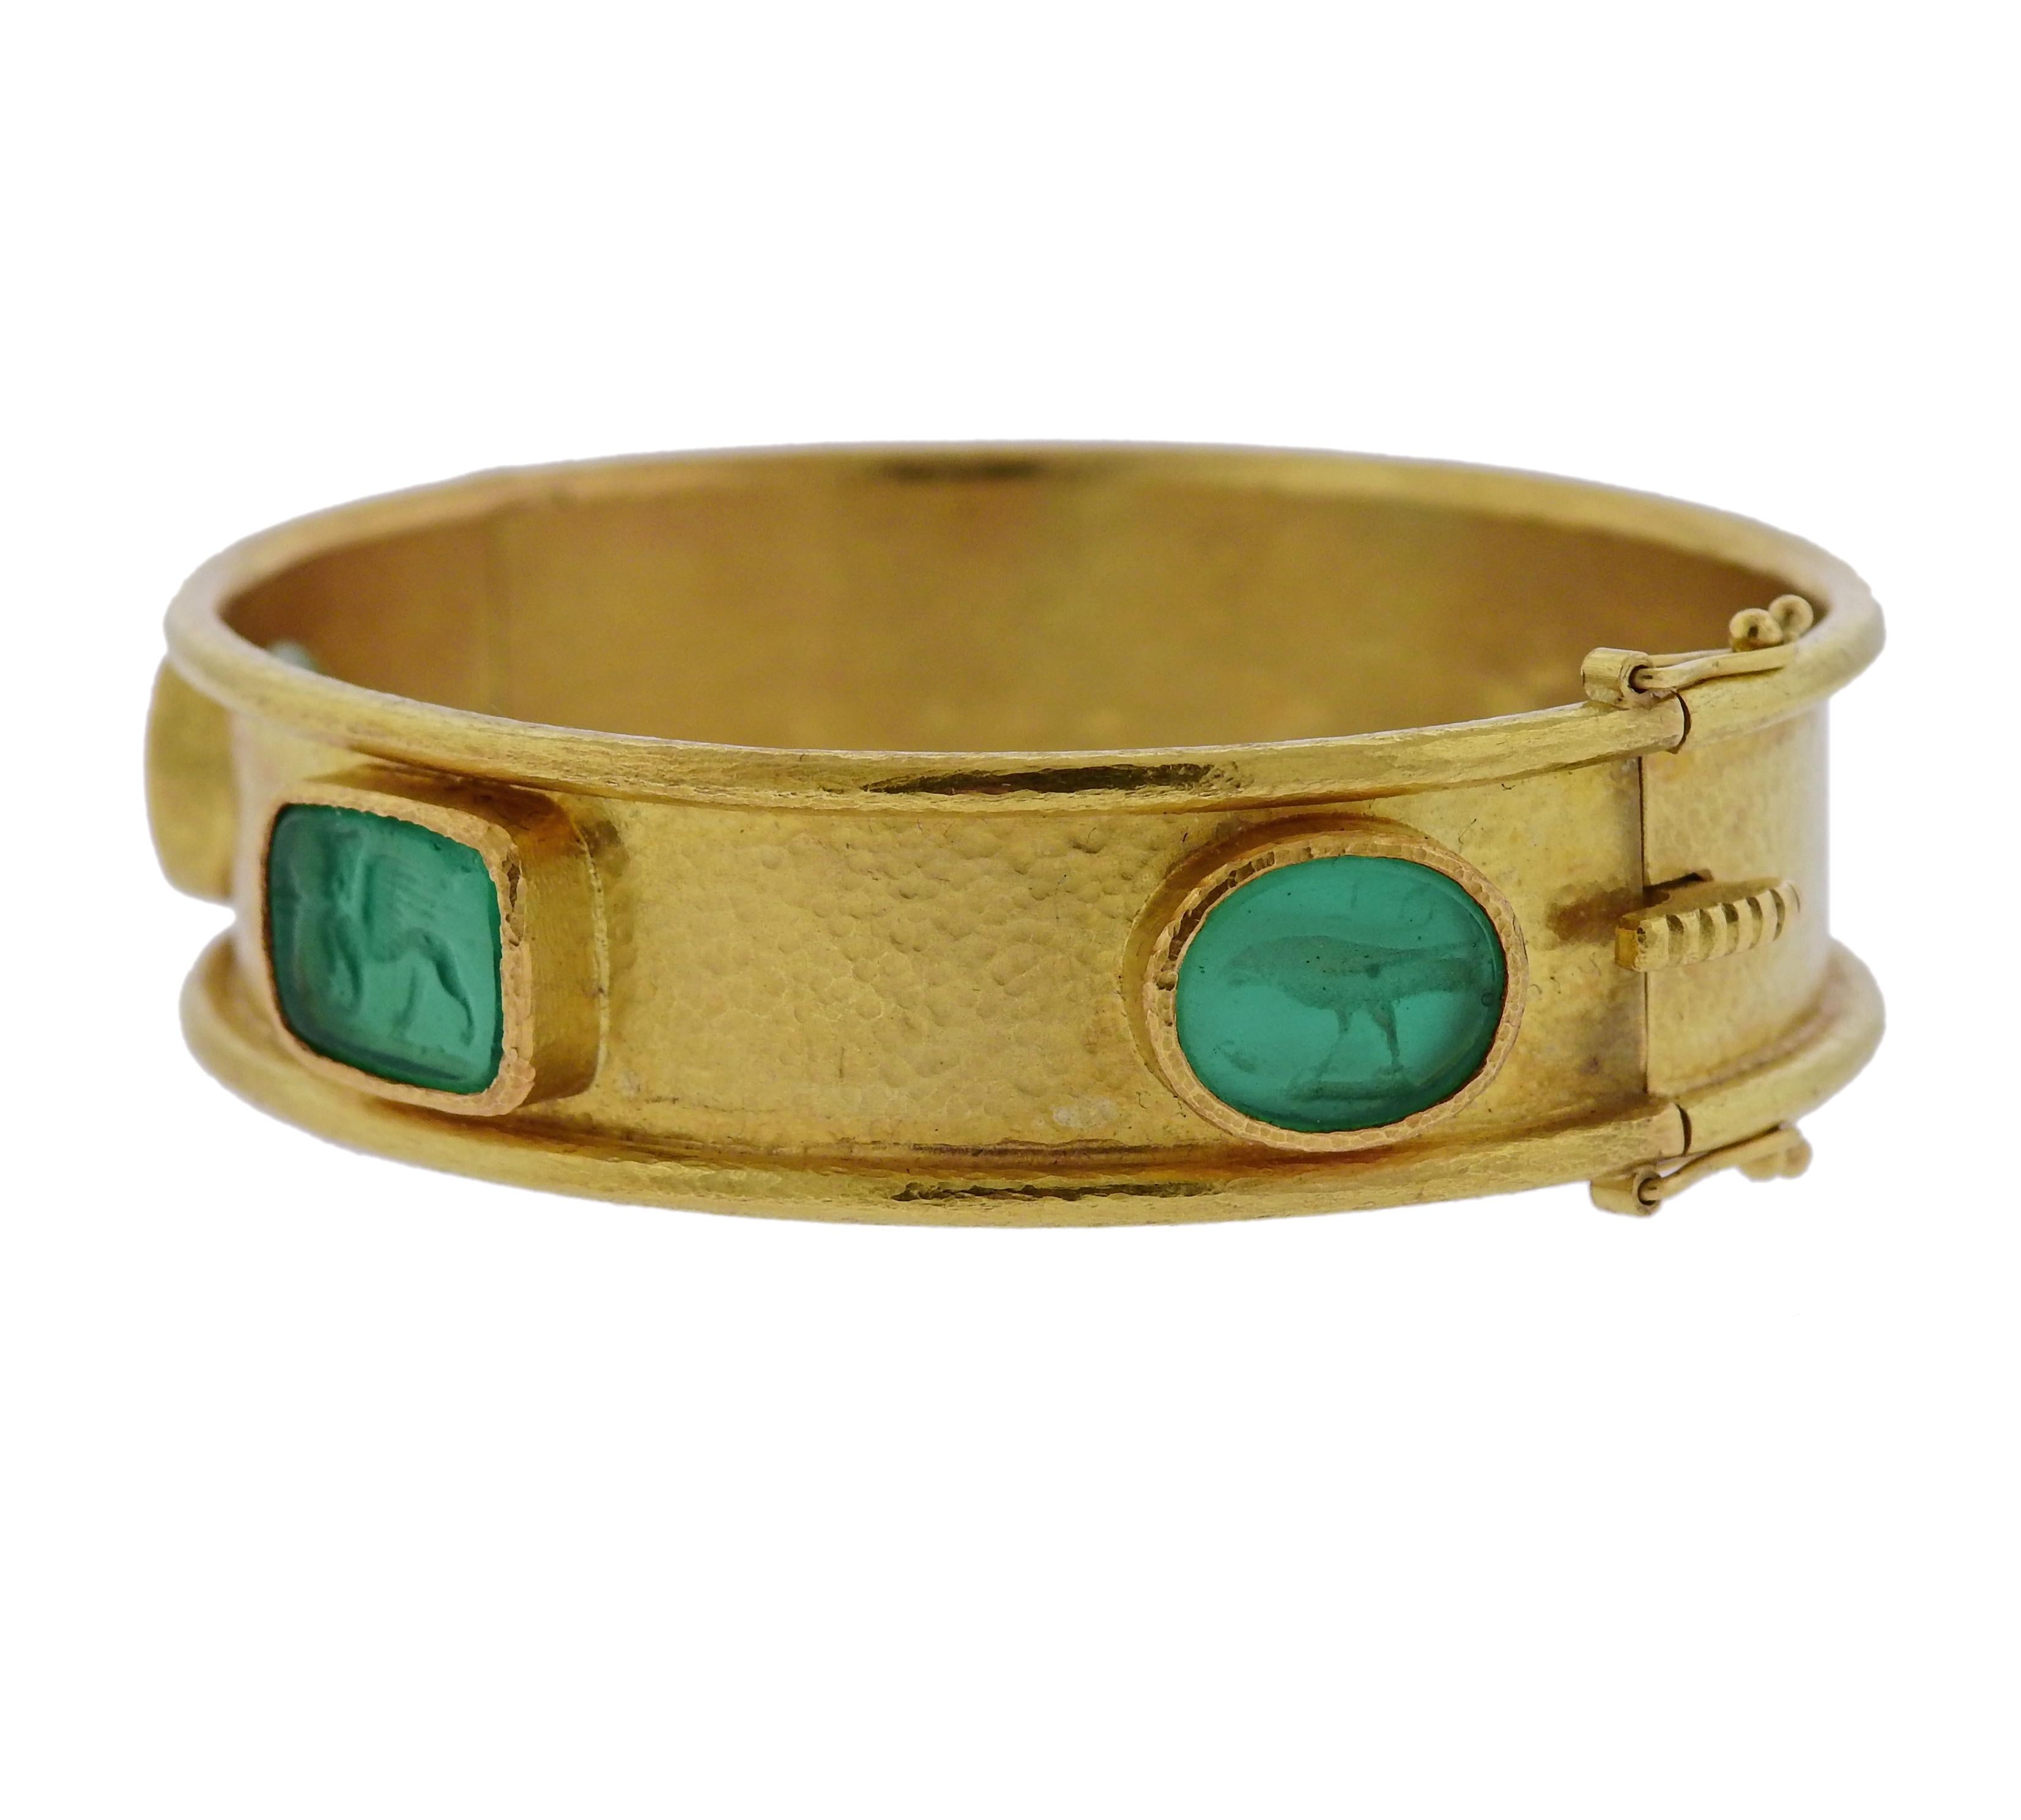 18k gold bangle bracelet, crafted by Elizabeth Locke, set with green Venetian glass intaglio, backed with mother of pearl.  Bracelet will fit up to 7